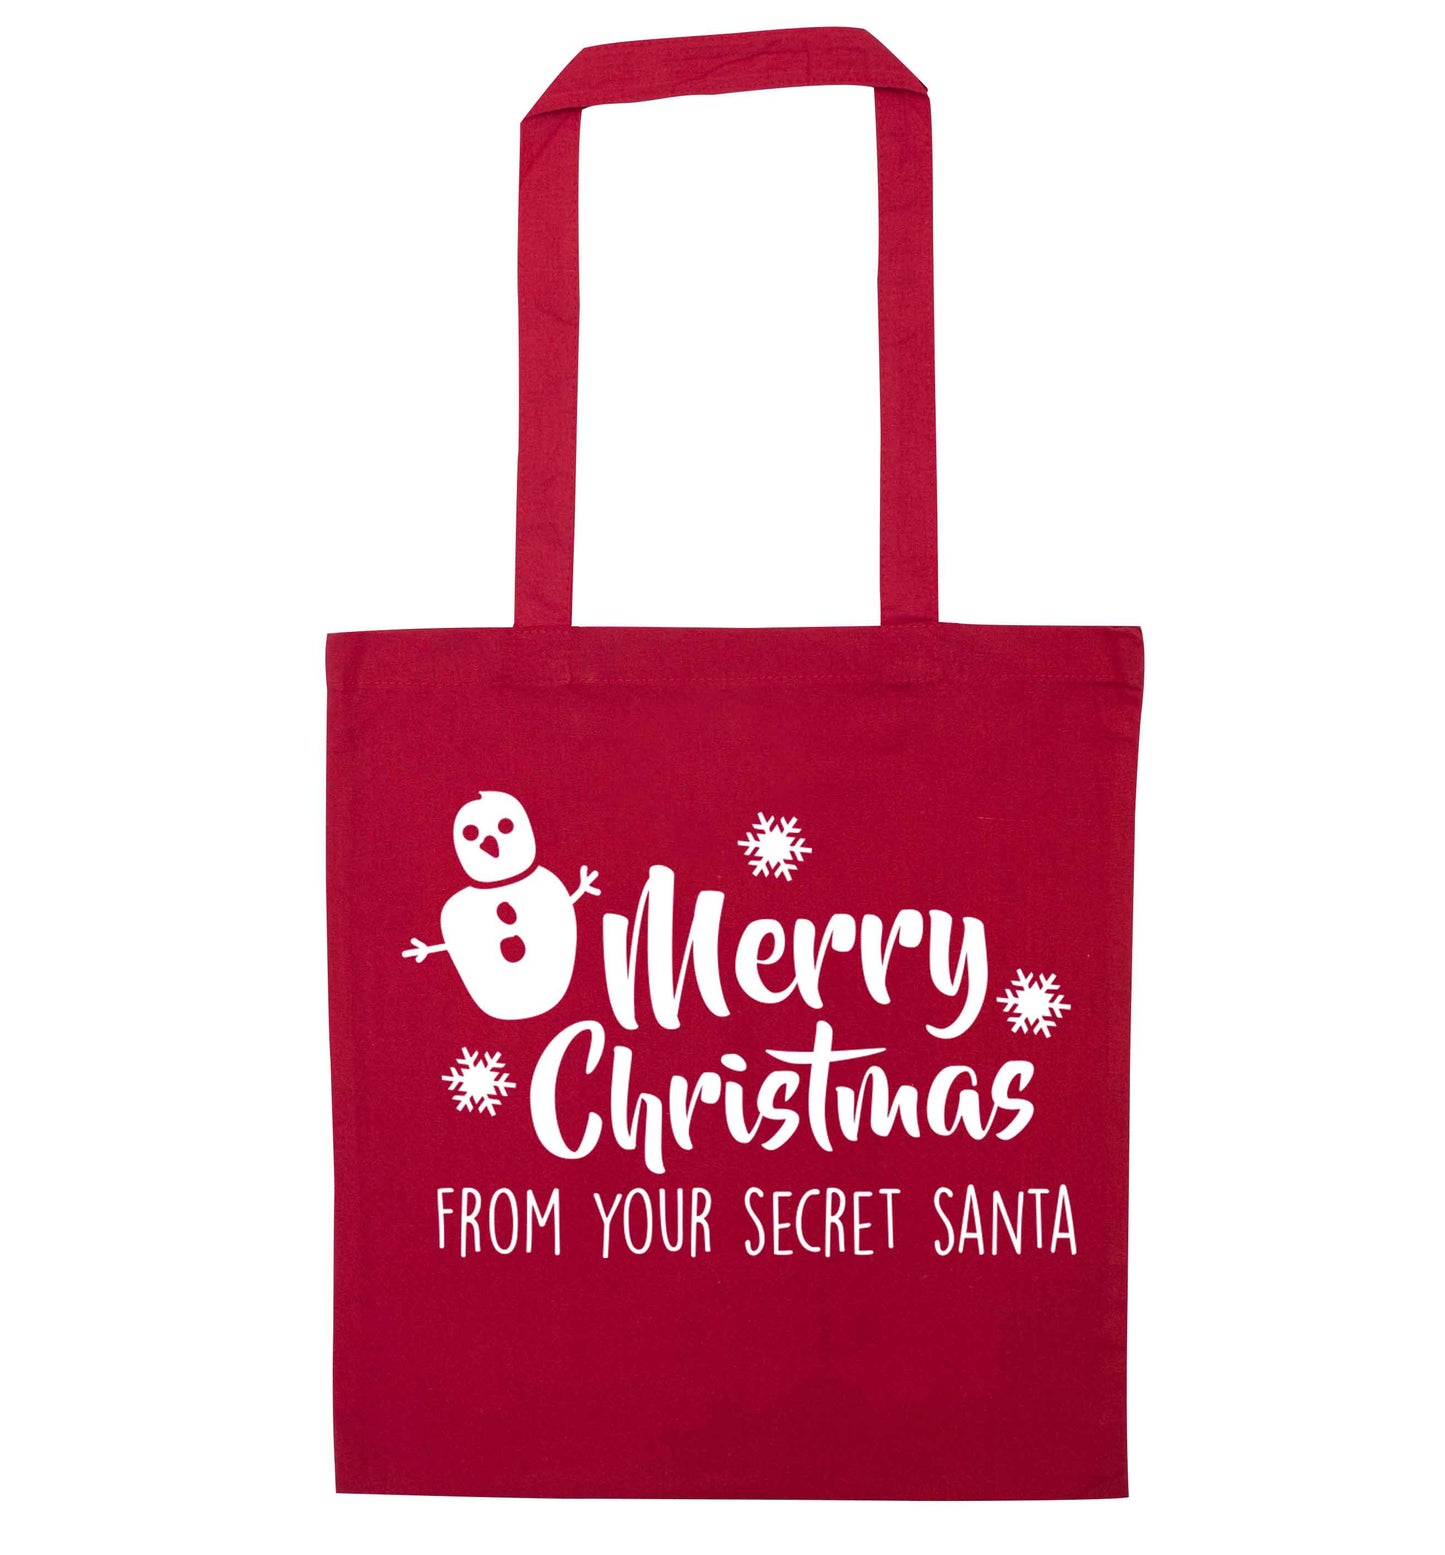 Merry Christmas from your secret Santa red tote bag